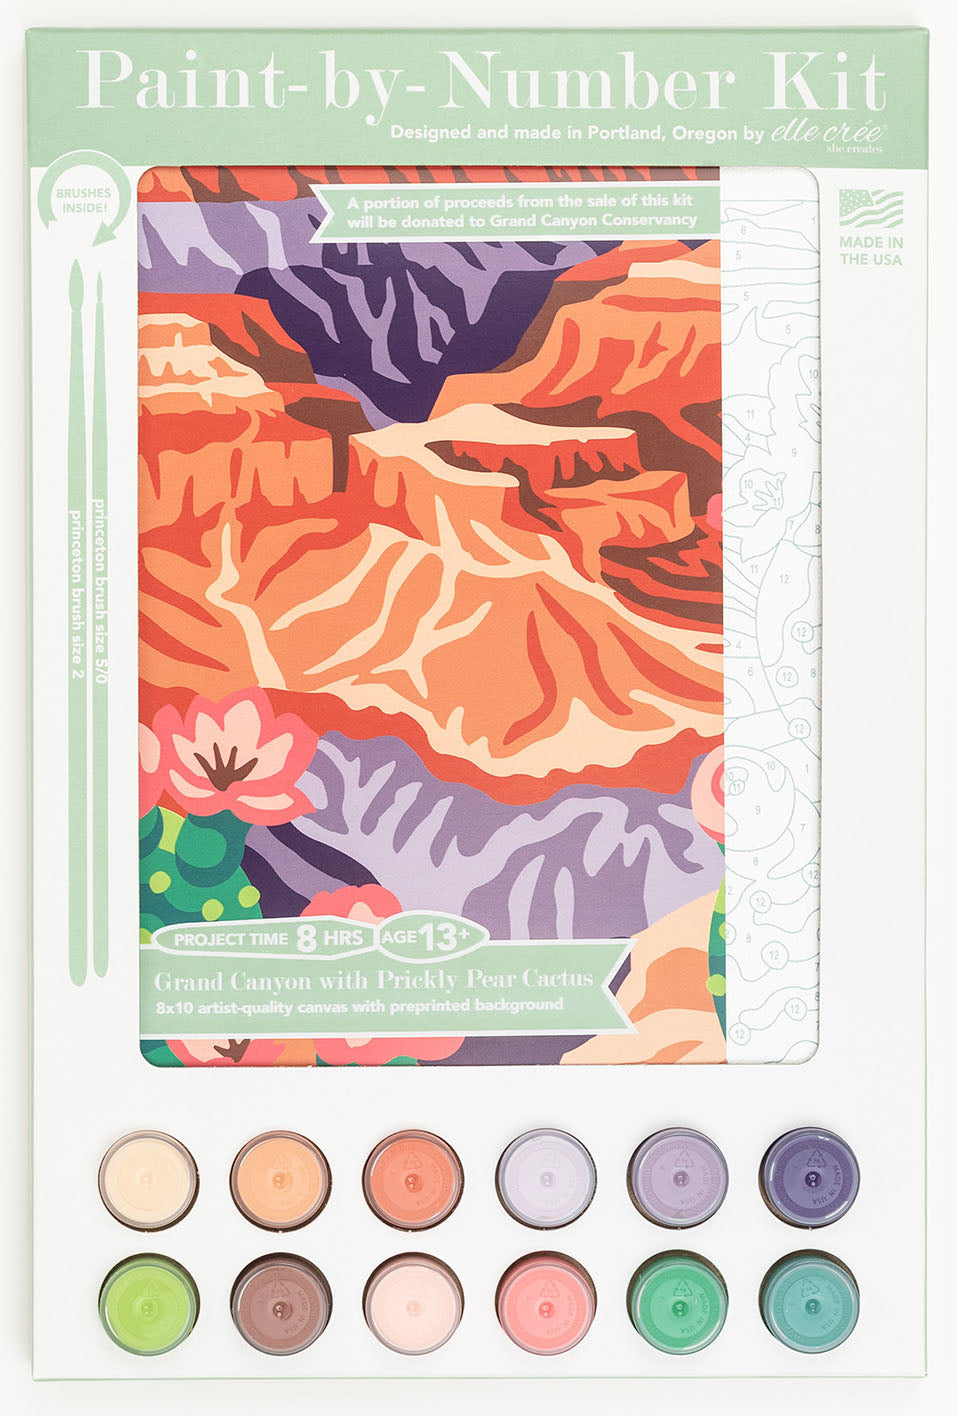 Grand Canyon Conservancy  Grand Canyon 8x10 Paint by Number Kit